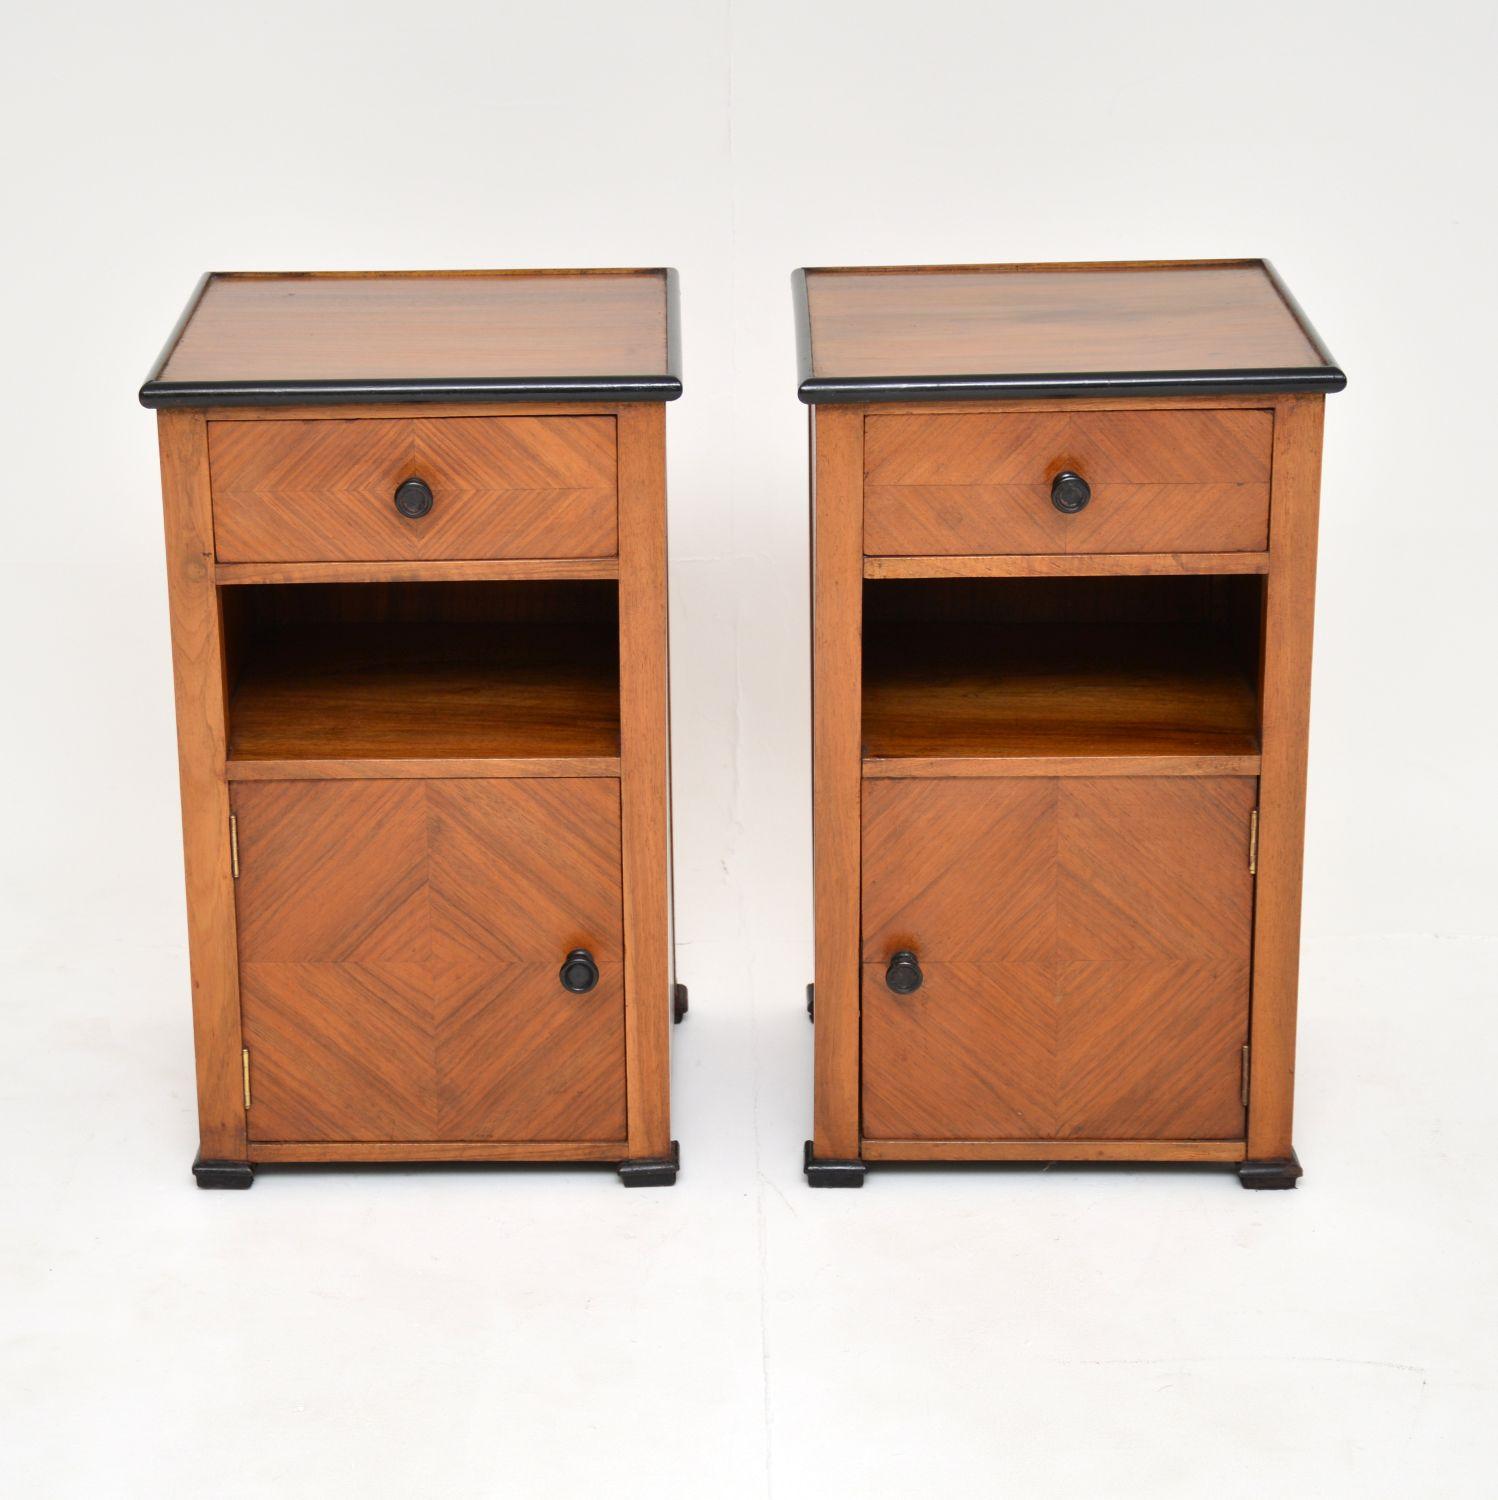 A lovely pair of original Art Deco period bedside cabinets in walnut. These were made in France, they date from the 1920-1930’s.

The quality is fantastic, these are beautifully made and are of lovely proportions. The walnut is inlaid in a